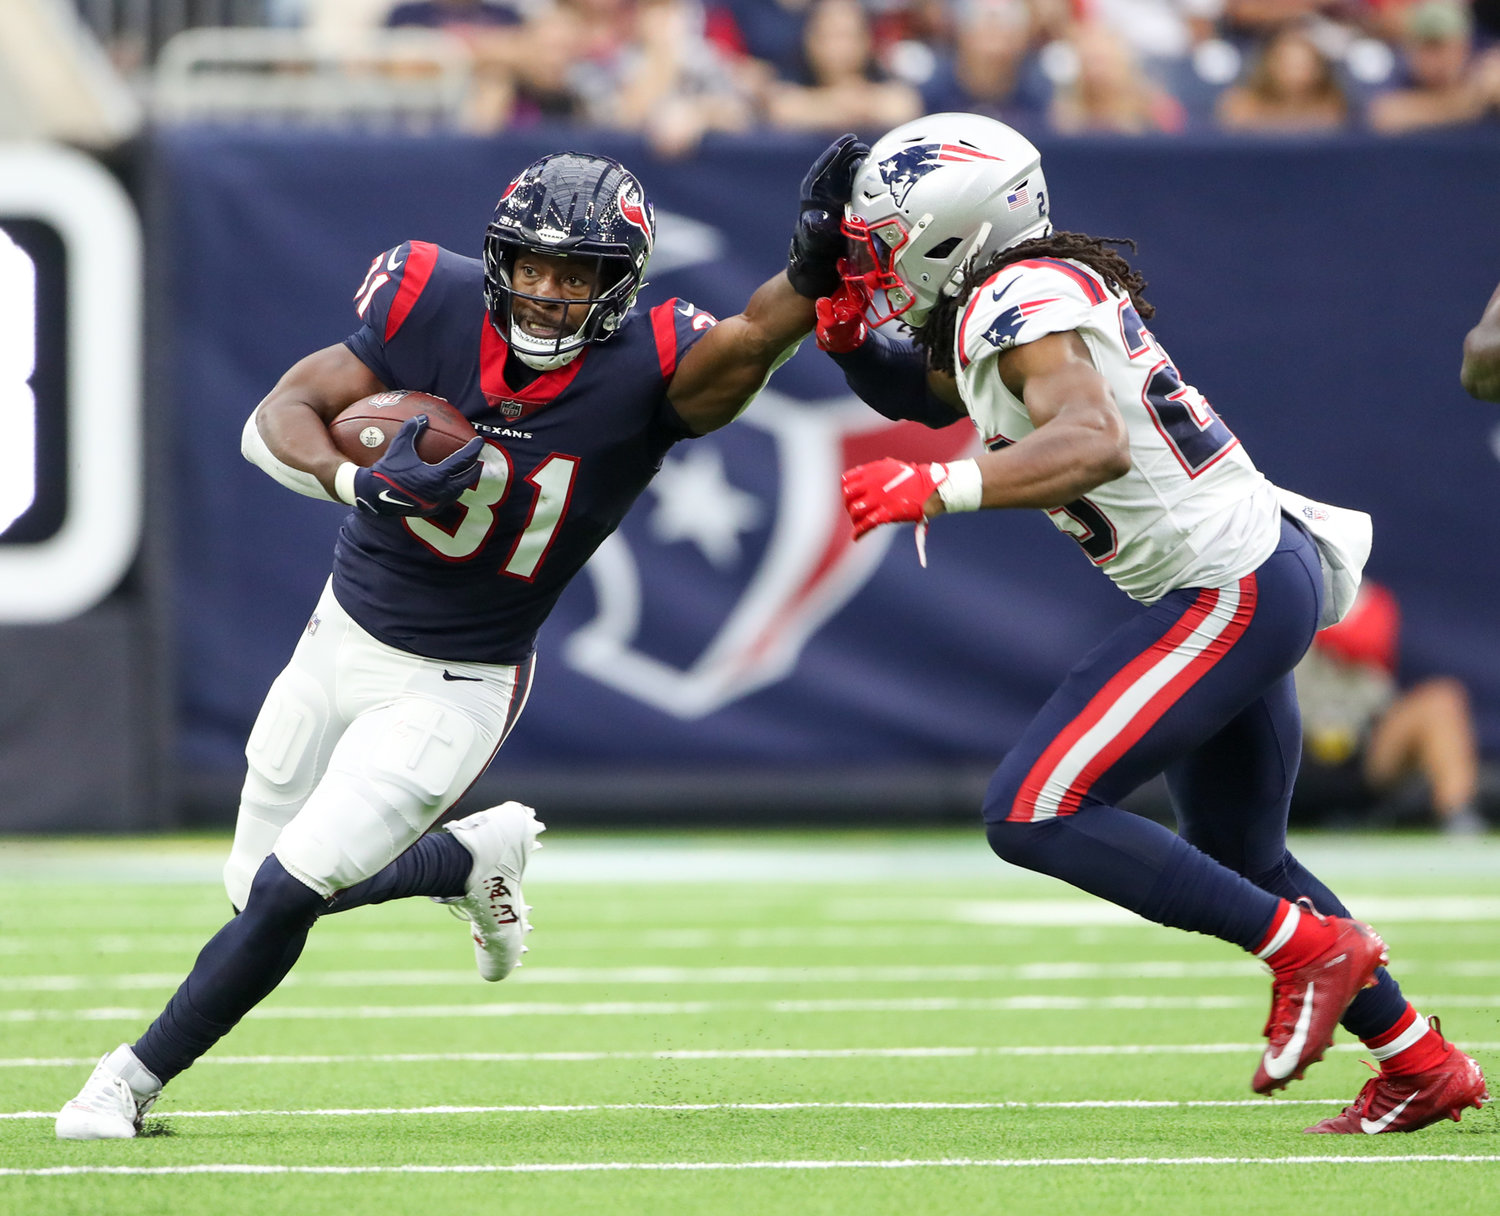 Houston Texans running back David Johnson (31) delivers a stiff arm to New England Patriots defensive back Kyle Dugger (23) on a carry during an NFL game between Houston and New England on October 10, 2021 in Houston, Texas. The Patriots won 25-22.